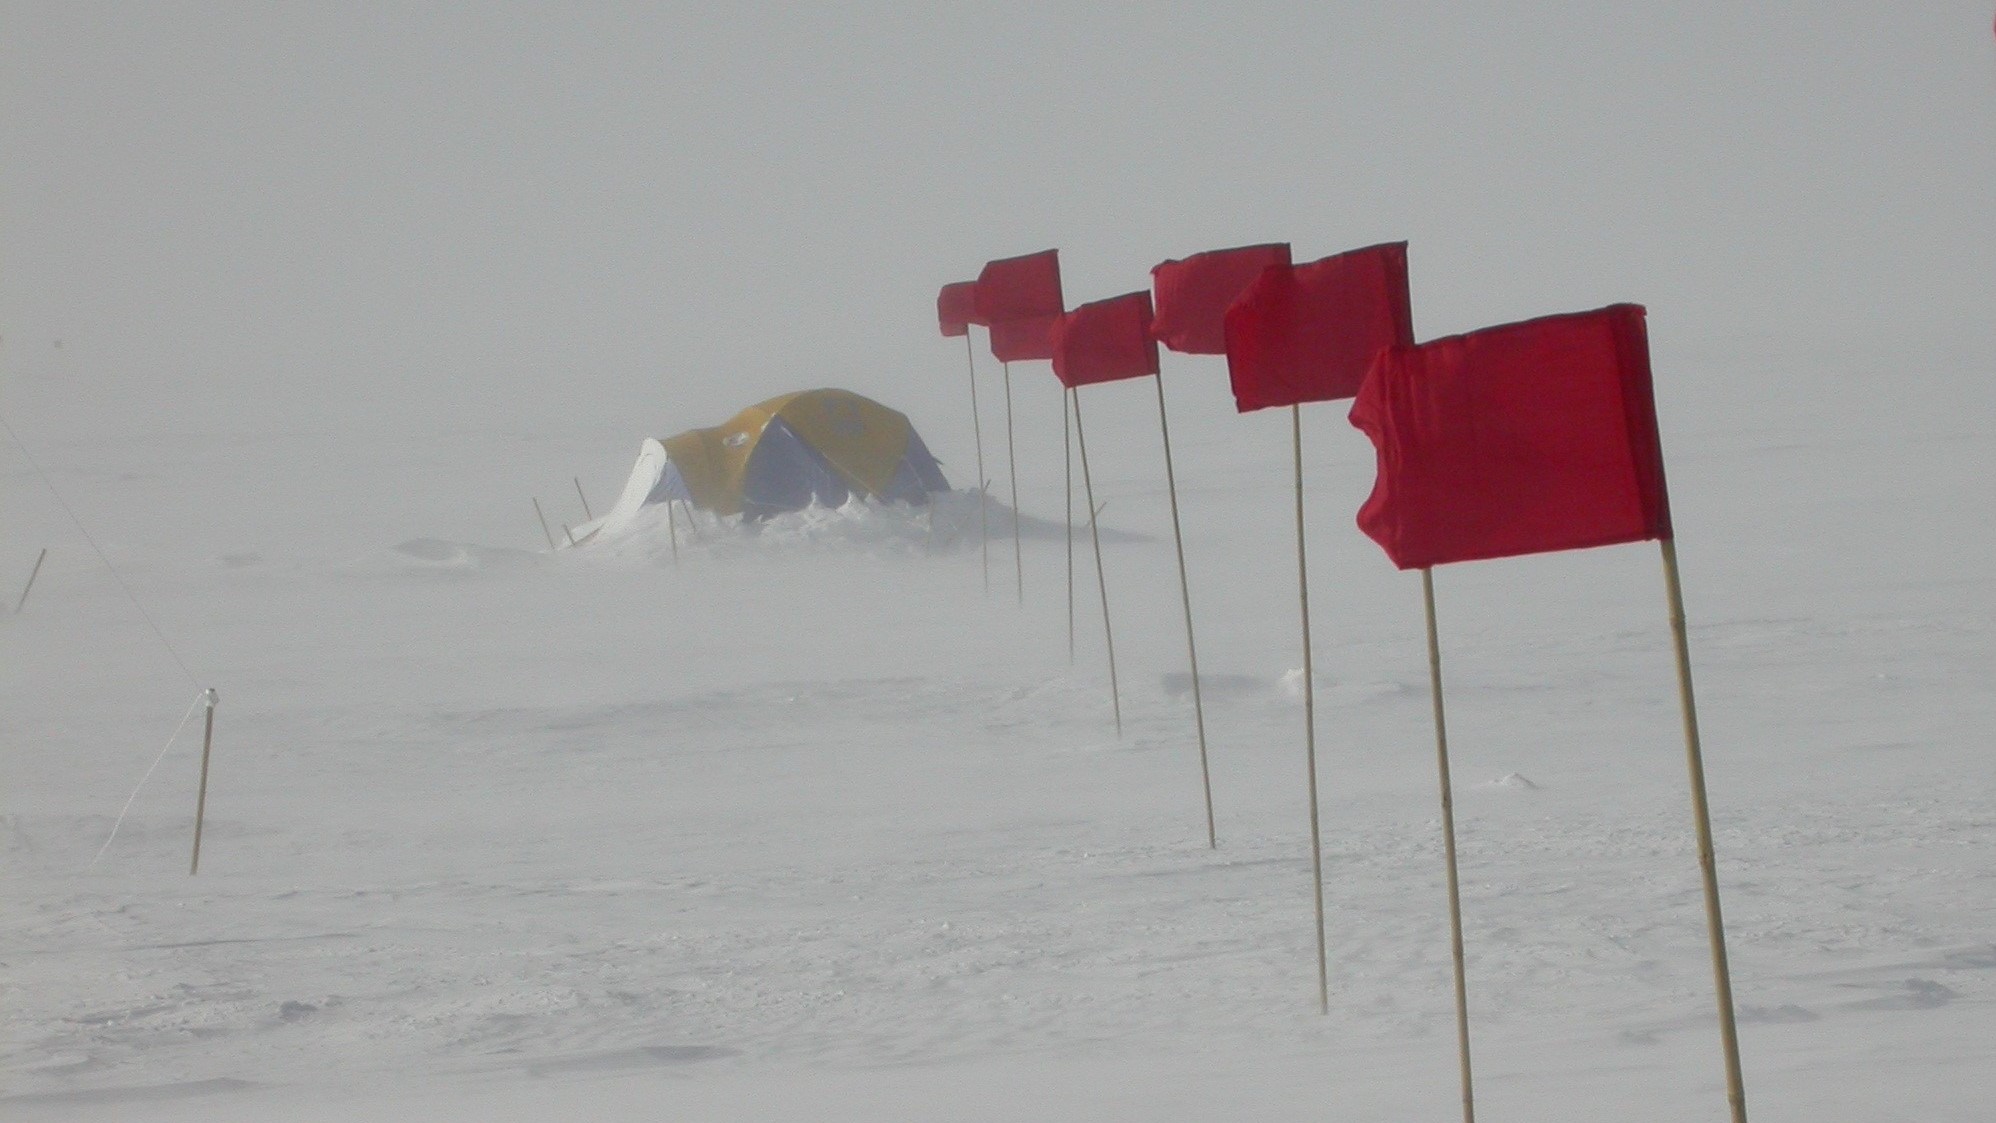 An igloo on an icy Antarctic plateau with red flags